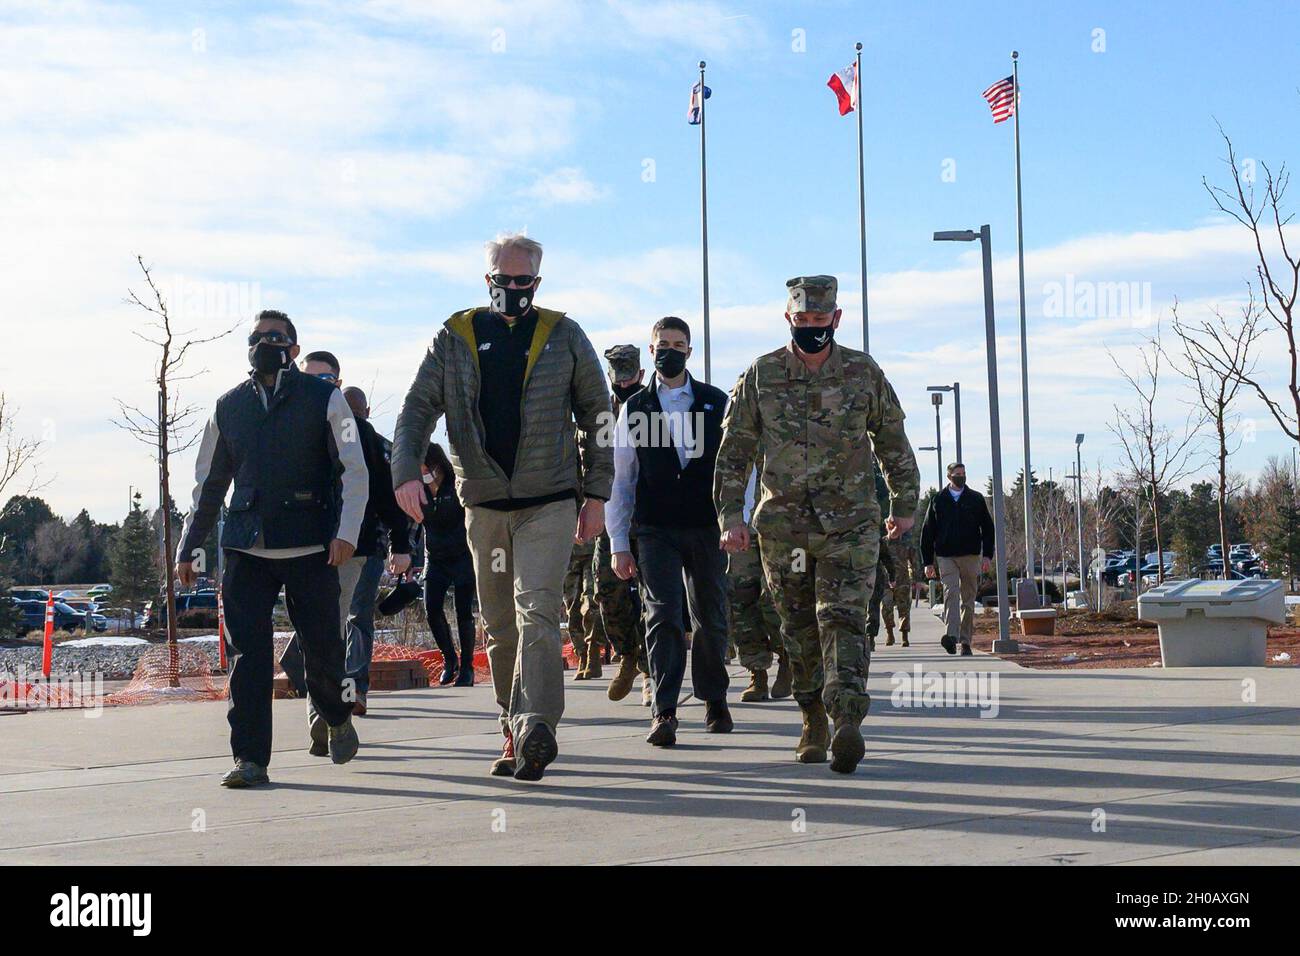 Acting Defense Secretary Chris Miller walks with the commander of North American Aerospace Defense Command and United States Northern Command, Air Force Gen. Glen VanHerck, at NORAD-USNORTHCOM headquarters, Peterson Air Force Base, Colo., Jan. 14, 2021. Stock Photo